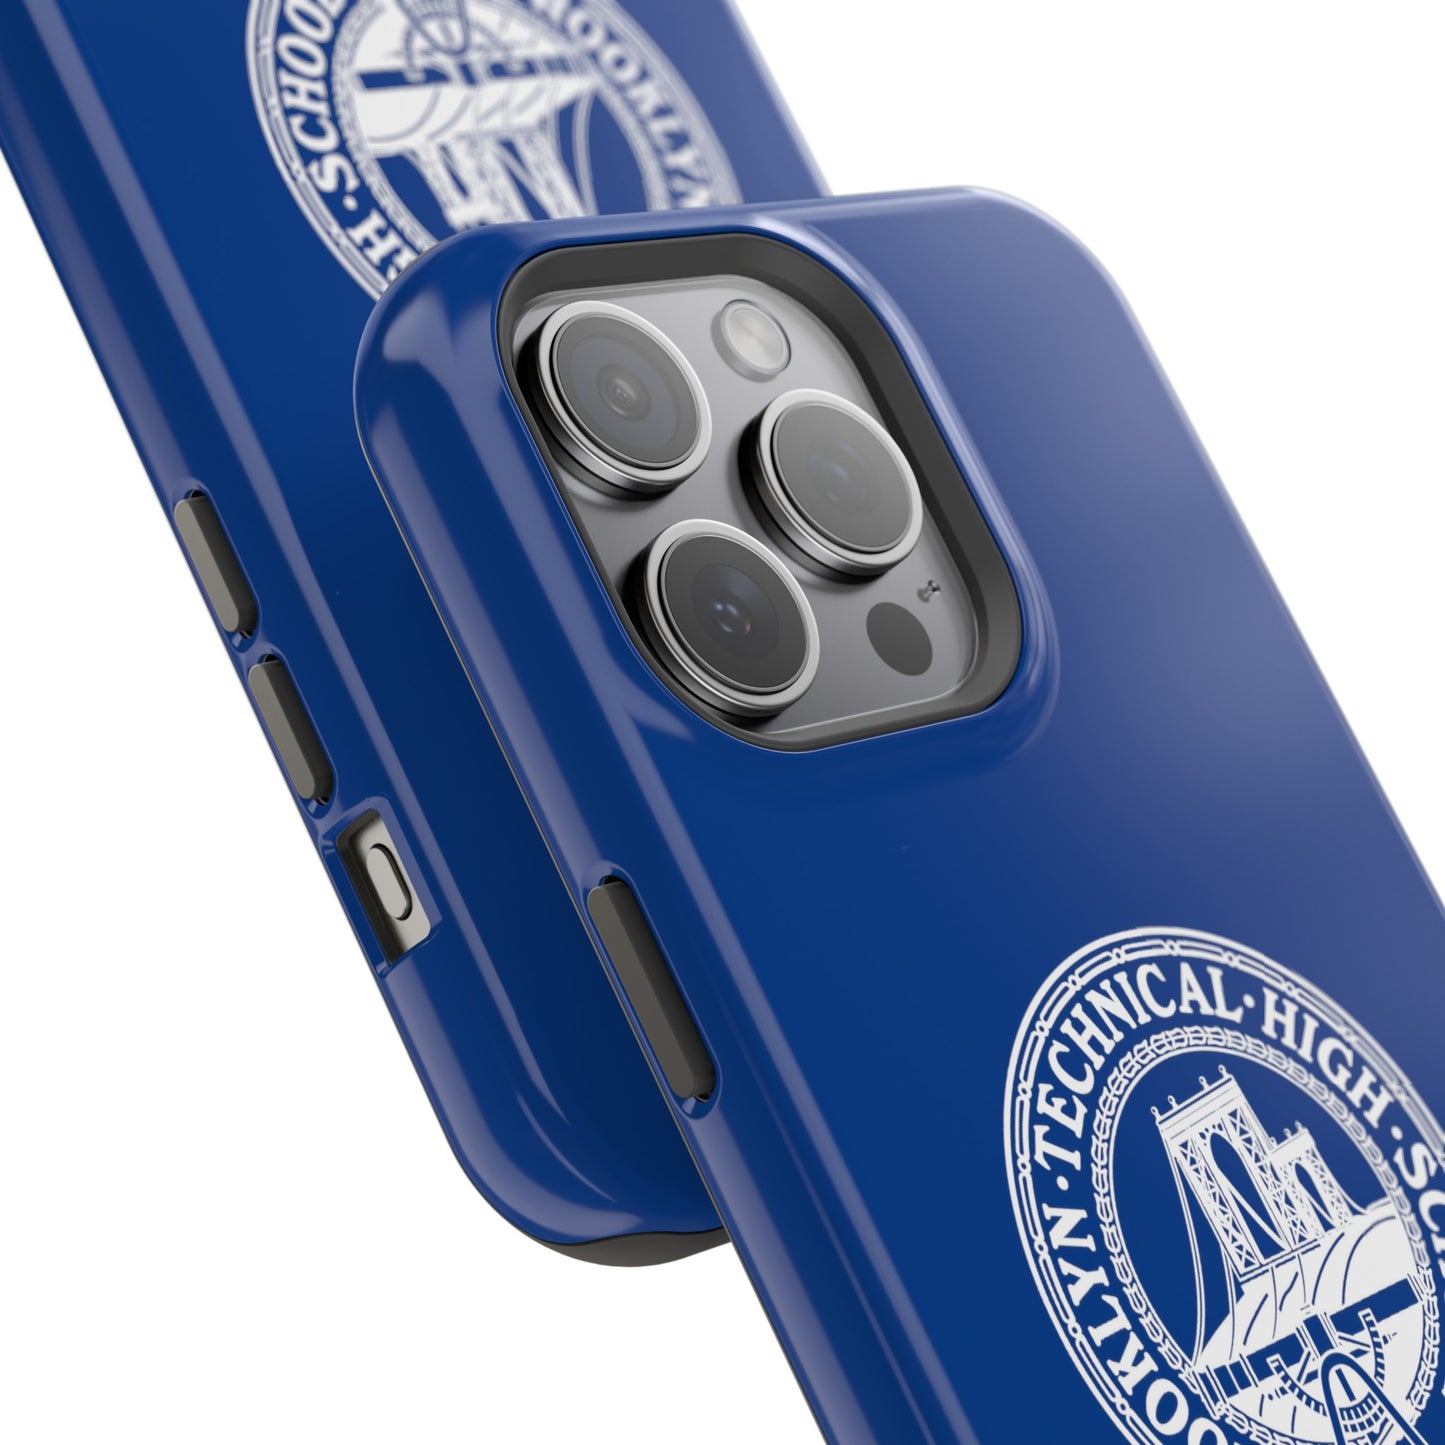 Impact-Resistant Phone Cases - Iphone Or Samsung - Navy